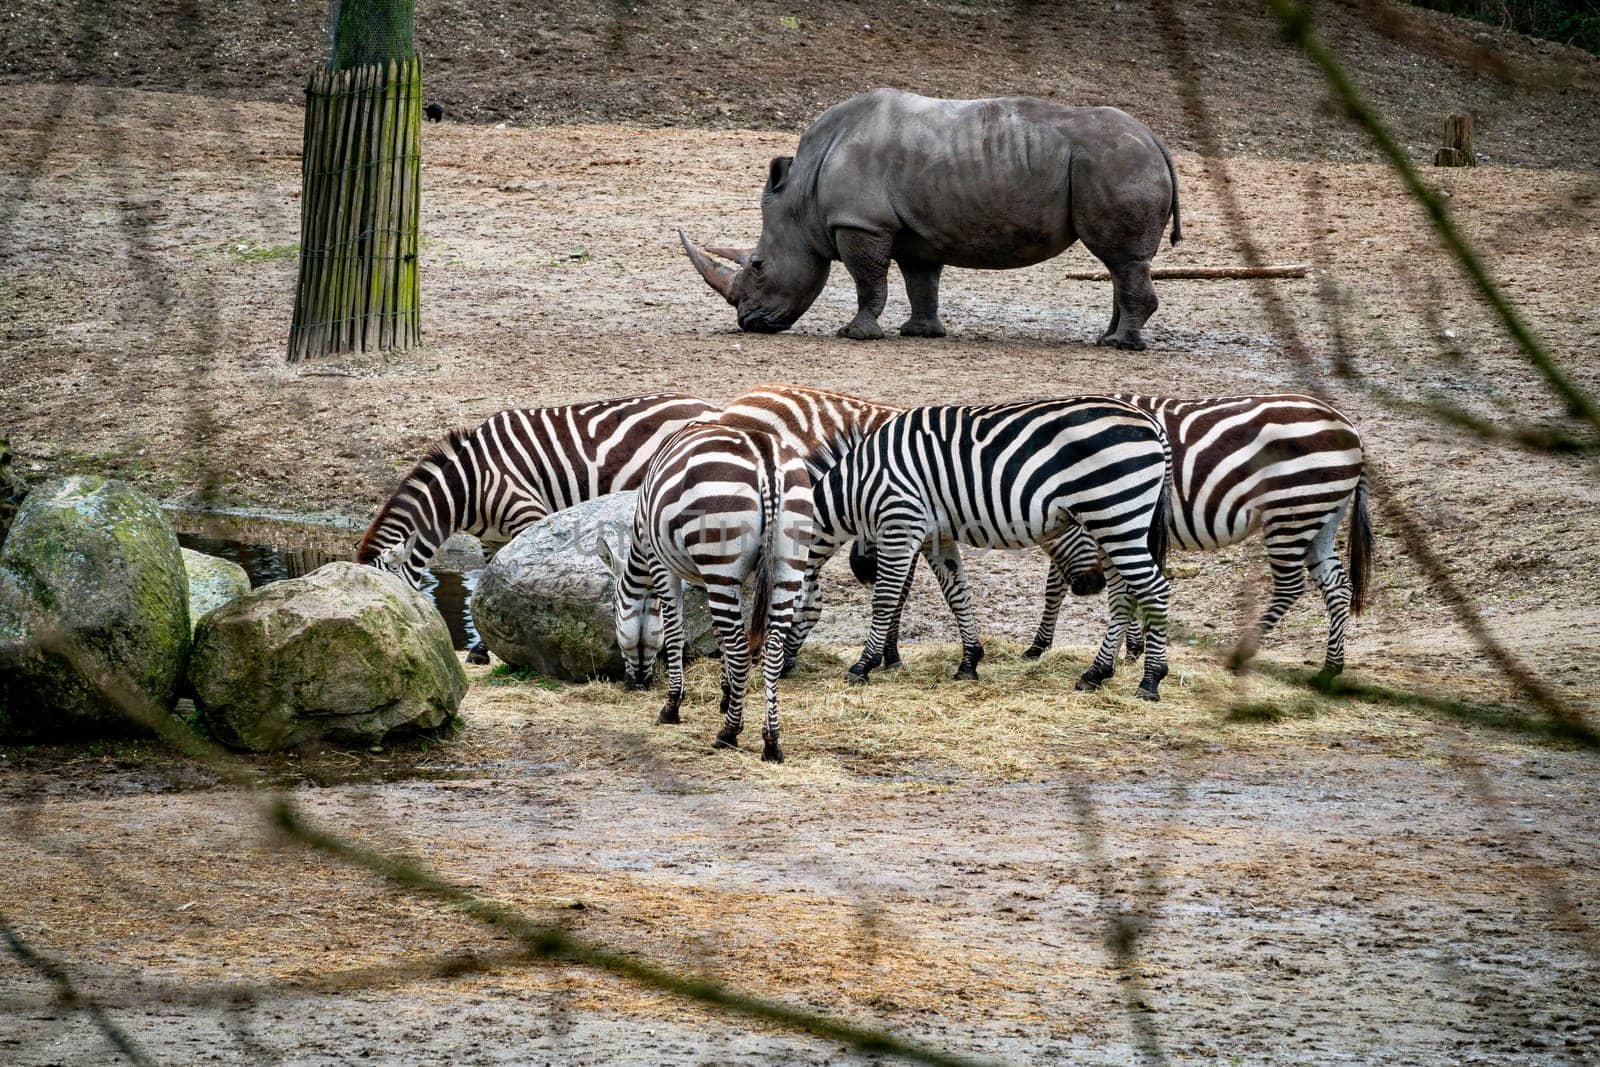 rhino and zebras near a water hole in zoo by compuinfoto